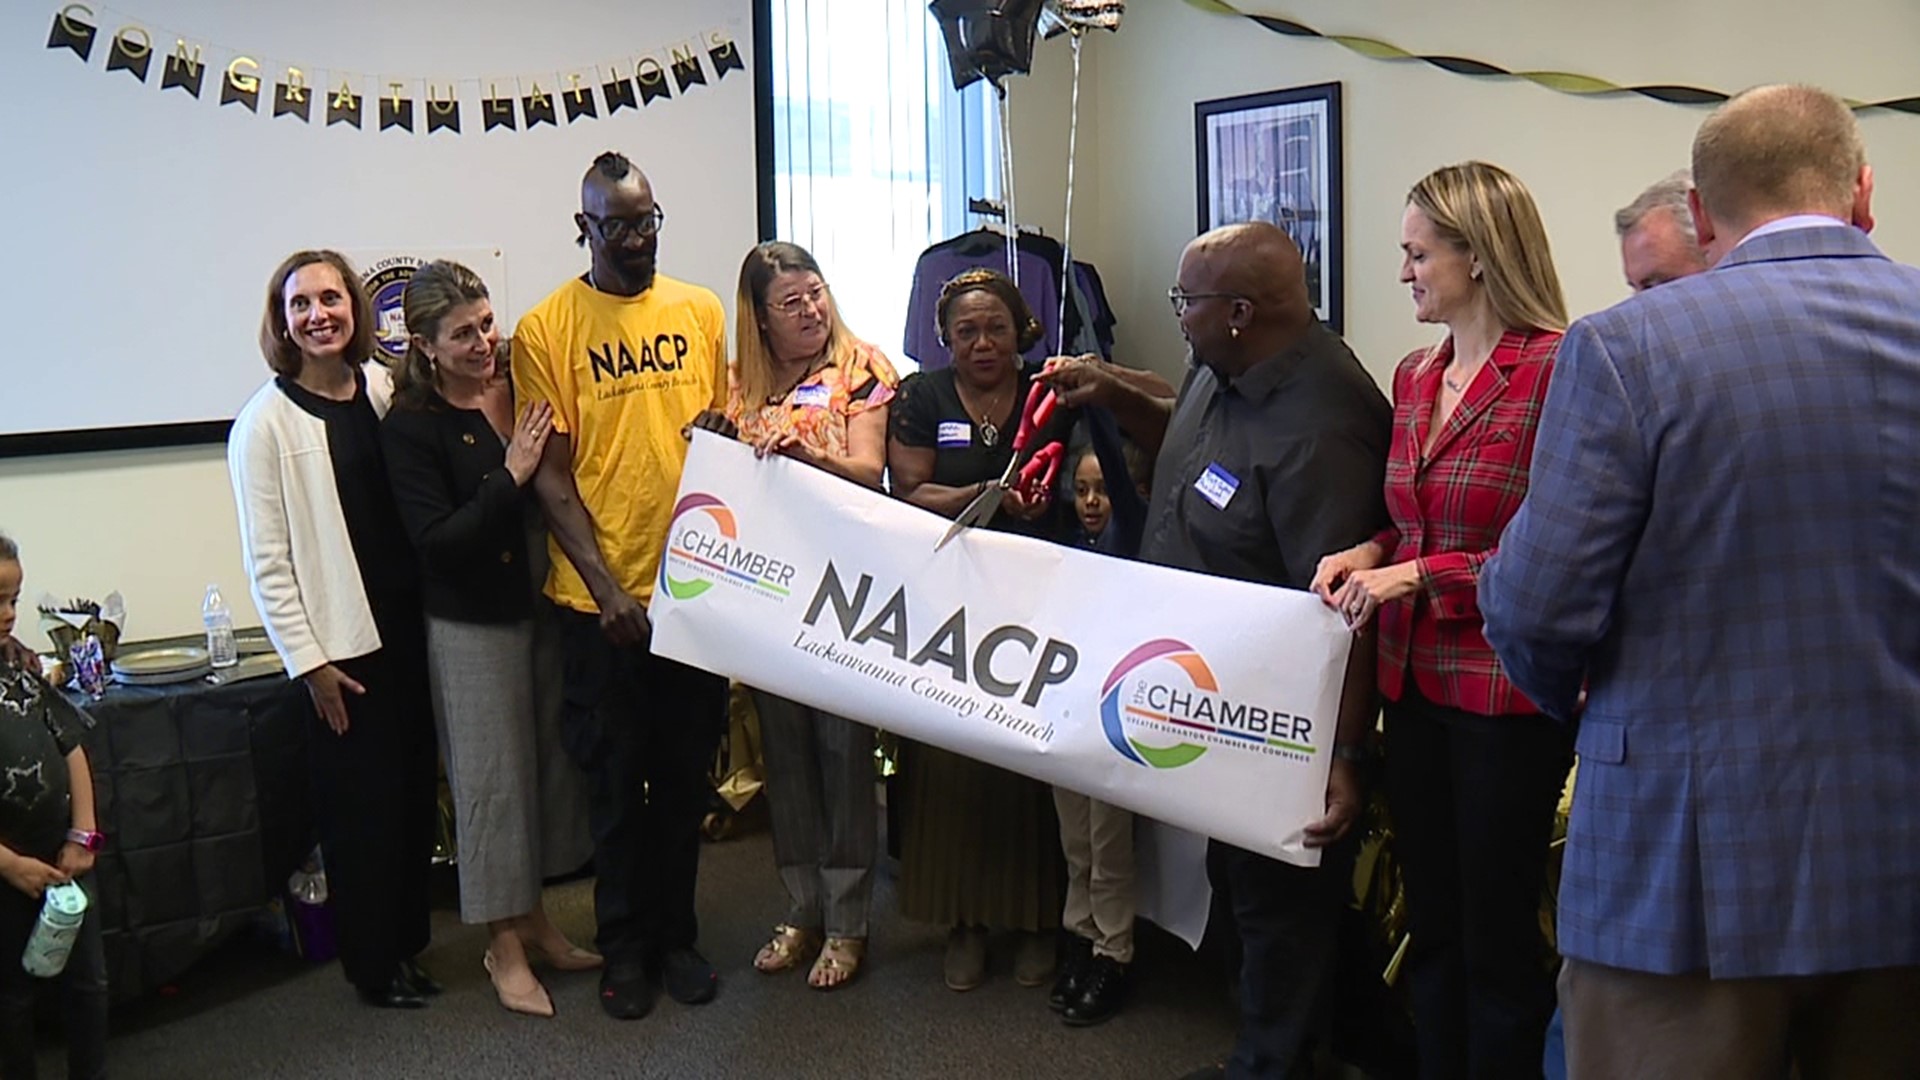 The Lackawanna County branch of the NAACP celebrated the grand opening Thursday evening.